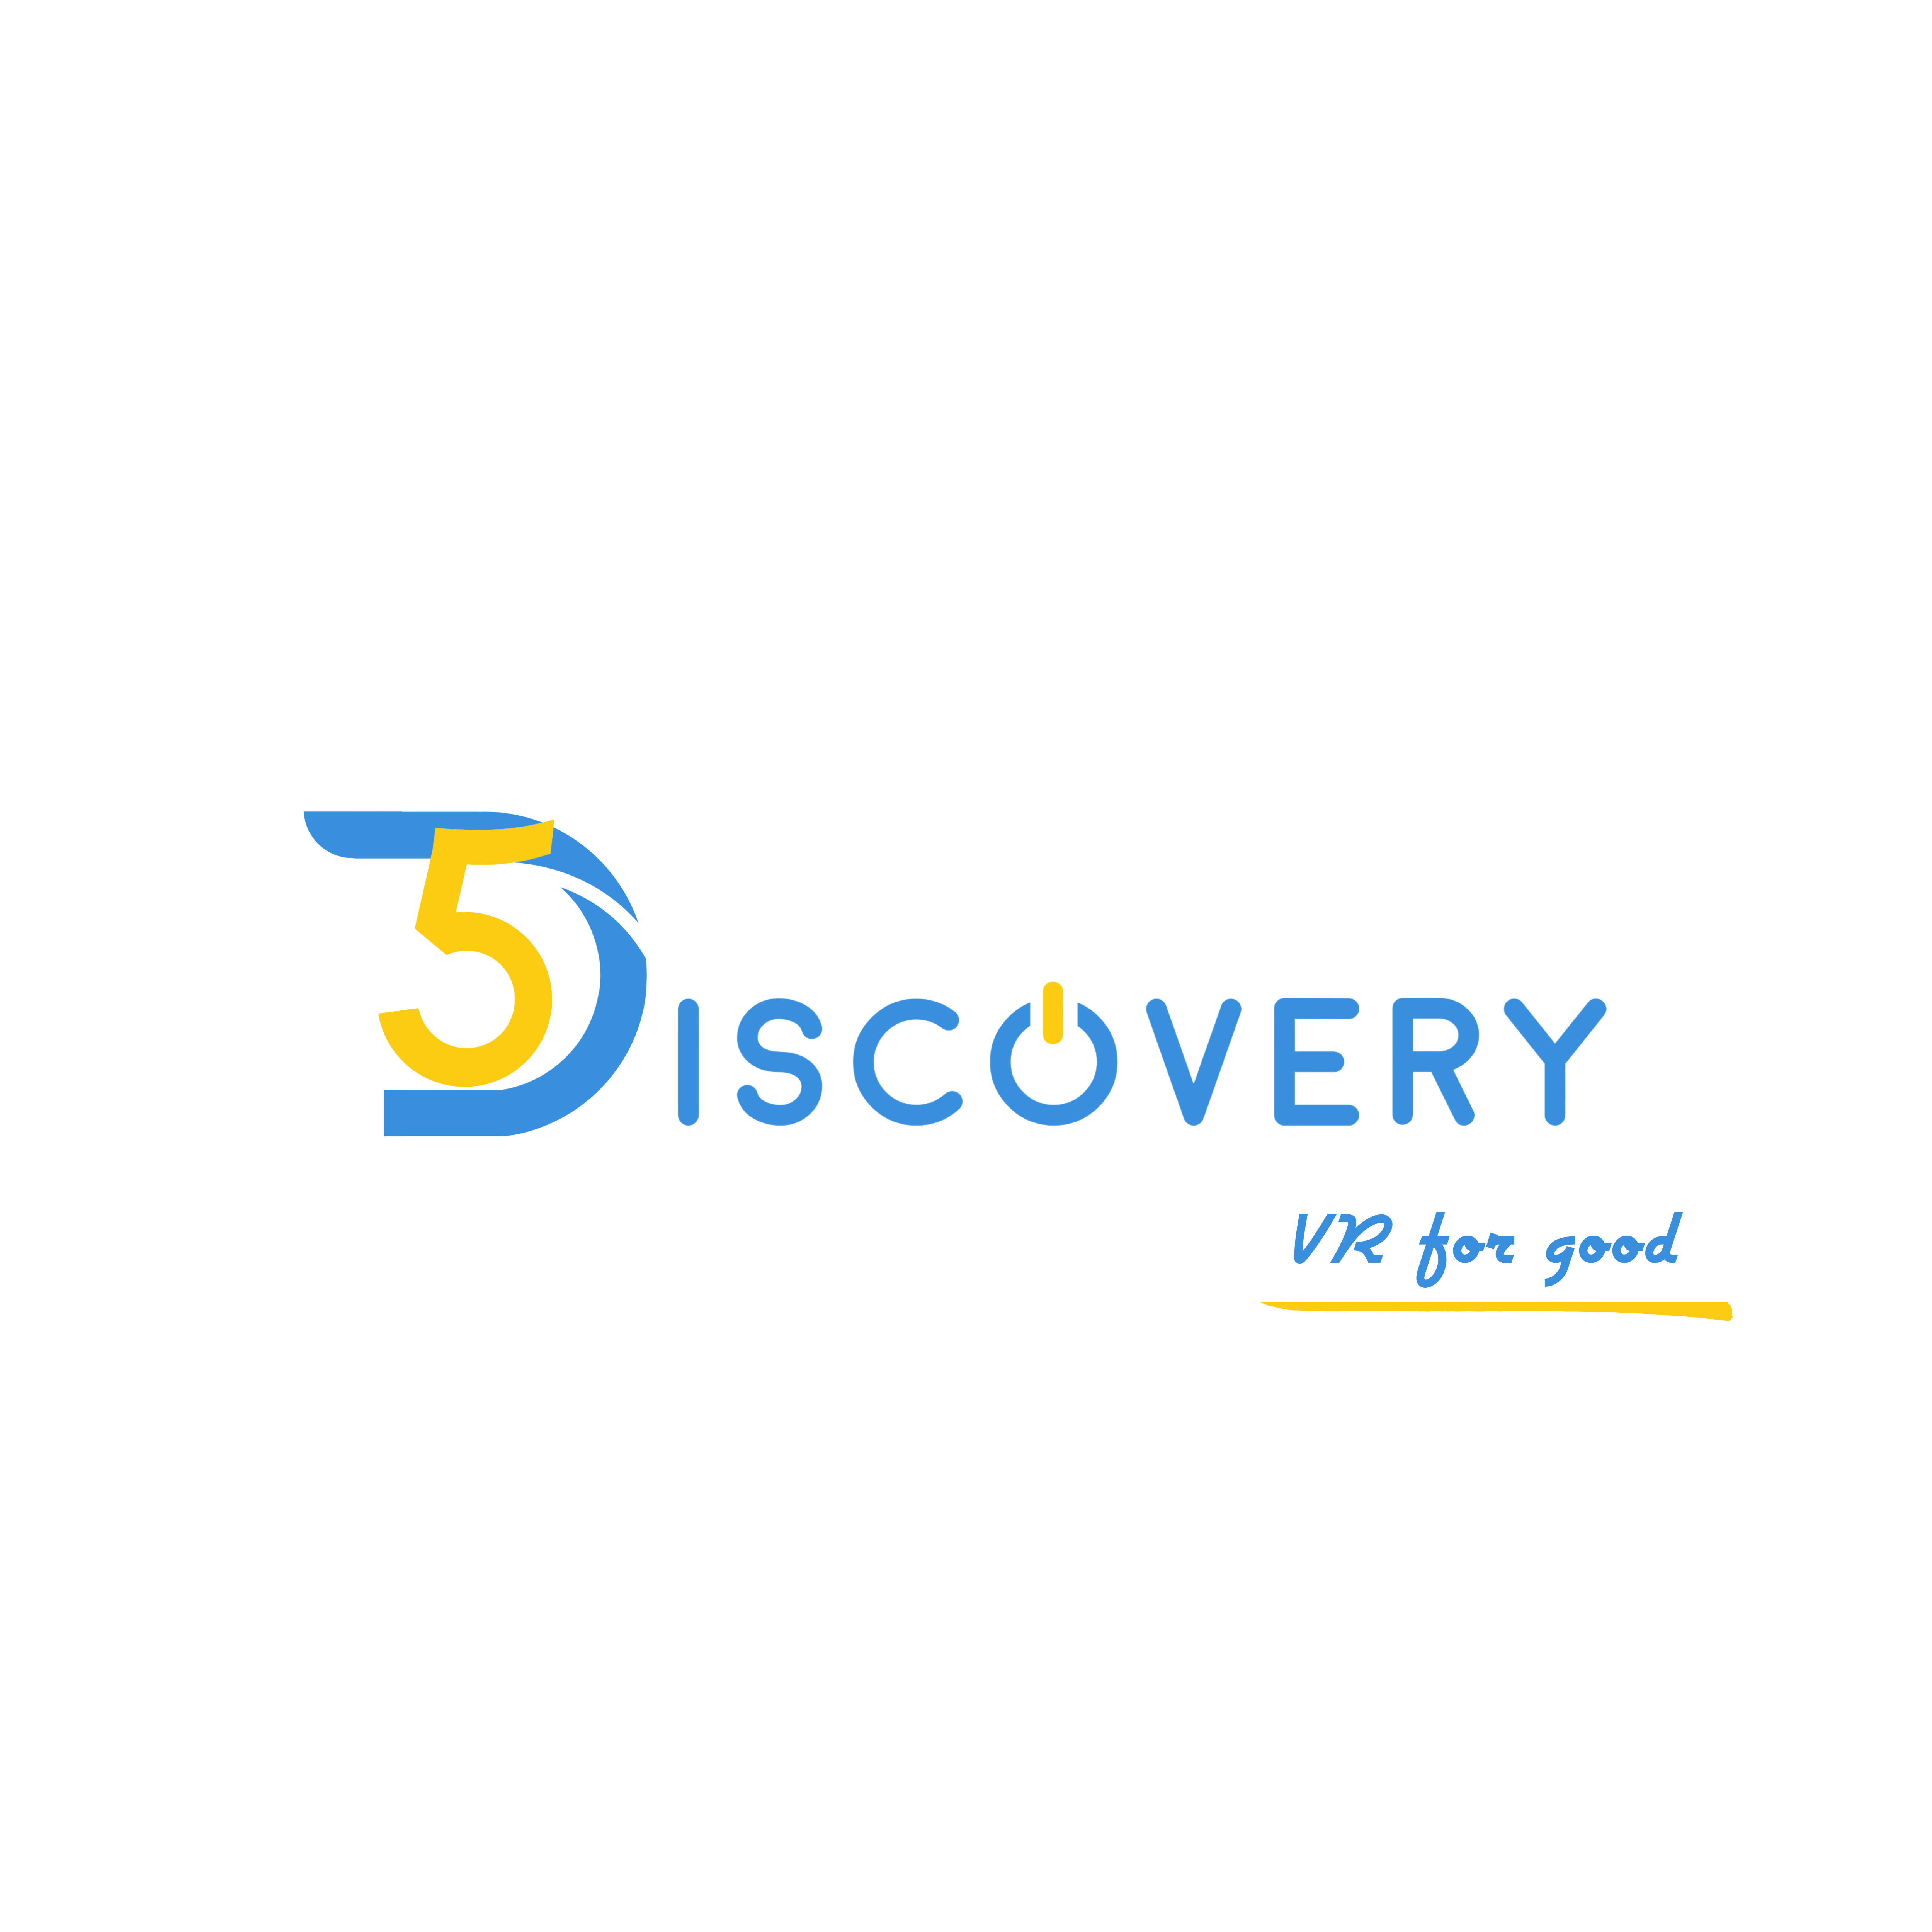 LOGO 5Discovery HD 2.png